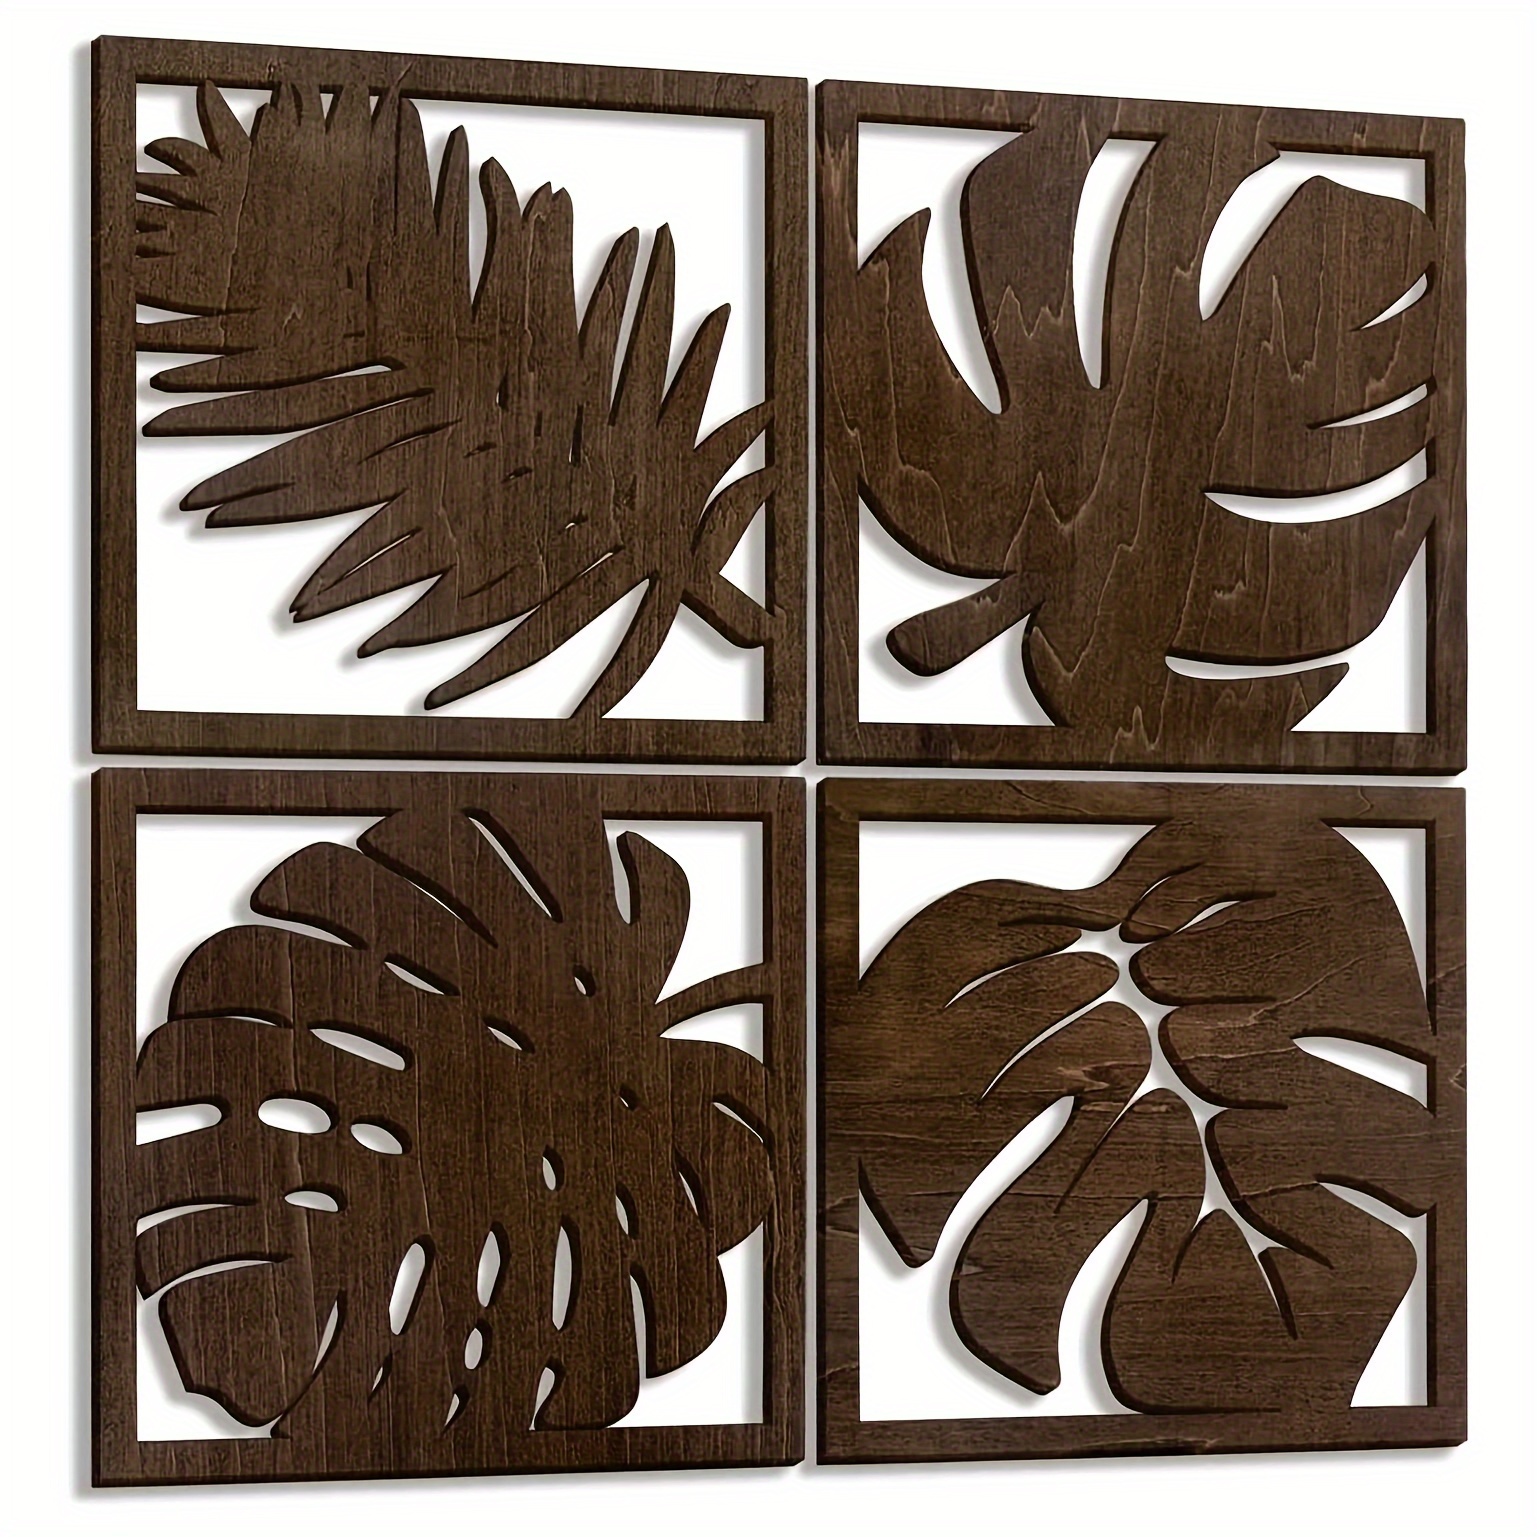 

4pcs Tropical Wall Art, Leaves Wall Decor, Wooden Leaves Plant Wall Decor, Hollow Tropical Leaves Pattern With Photo Frame Design, For Bedroom, Living Room